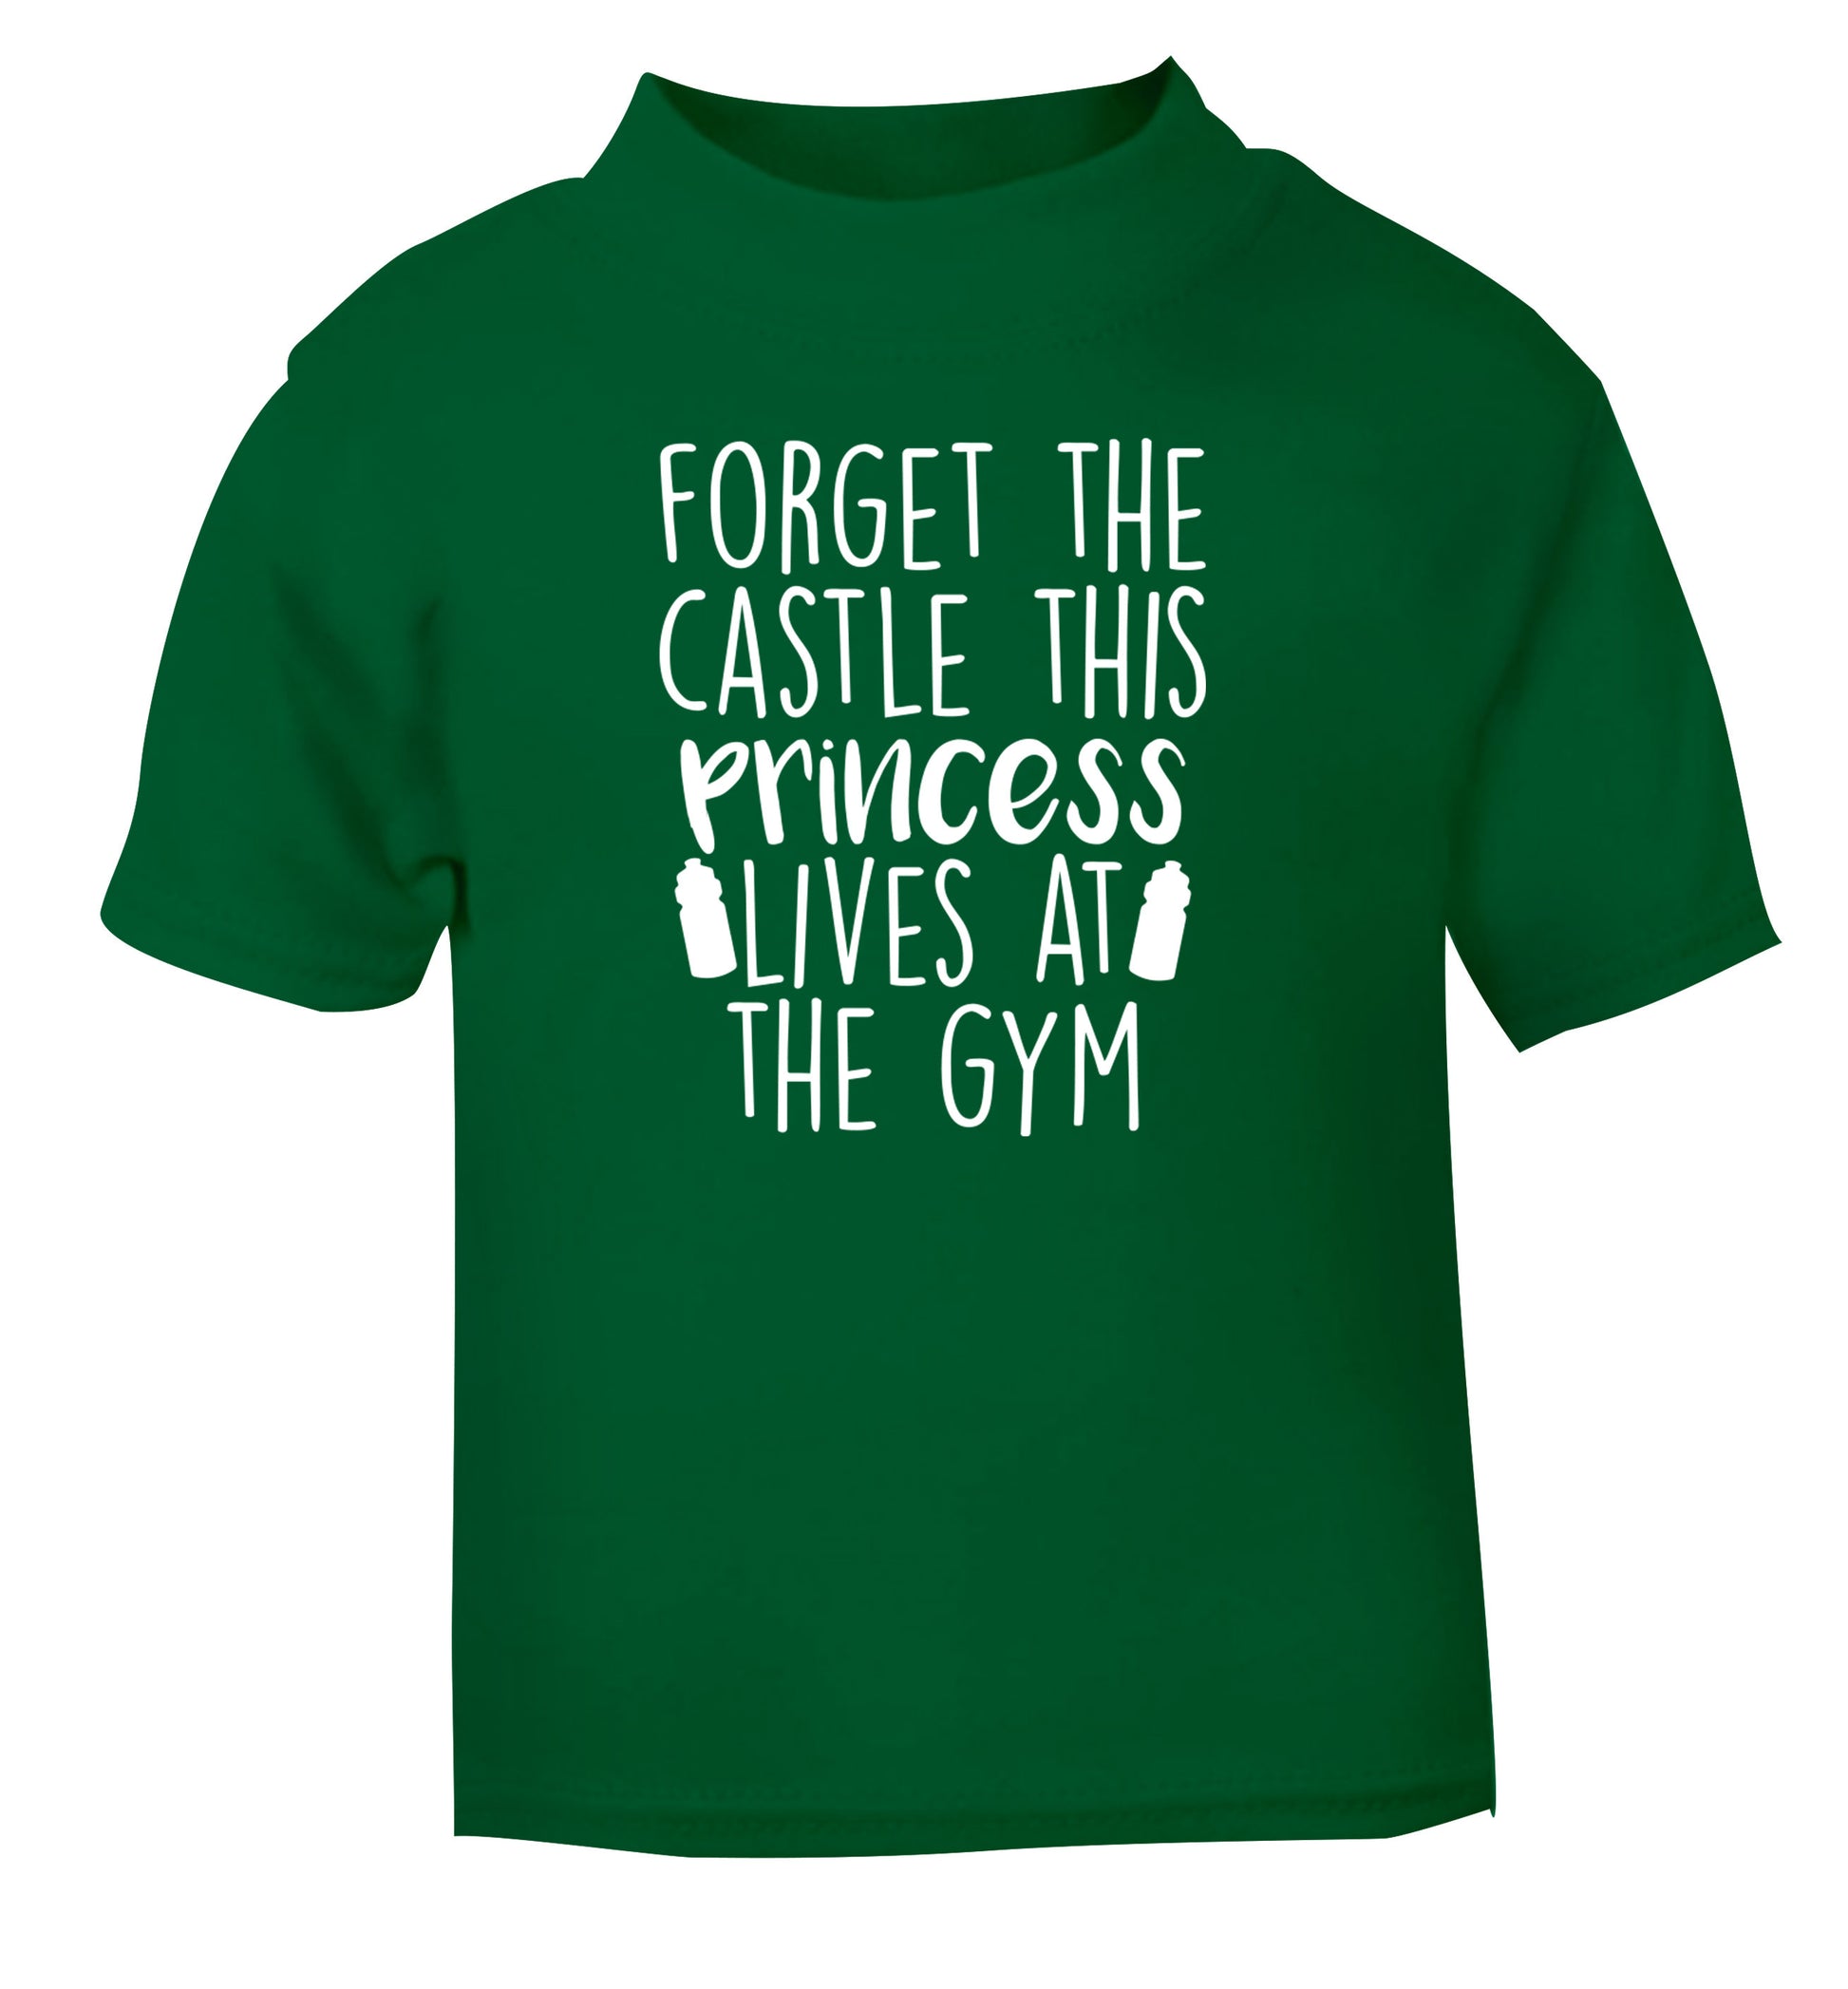 Forget the castle this princess lives at the gym green Baby Toddler Tshirt 2 Years